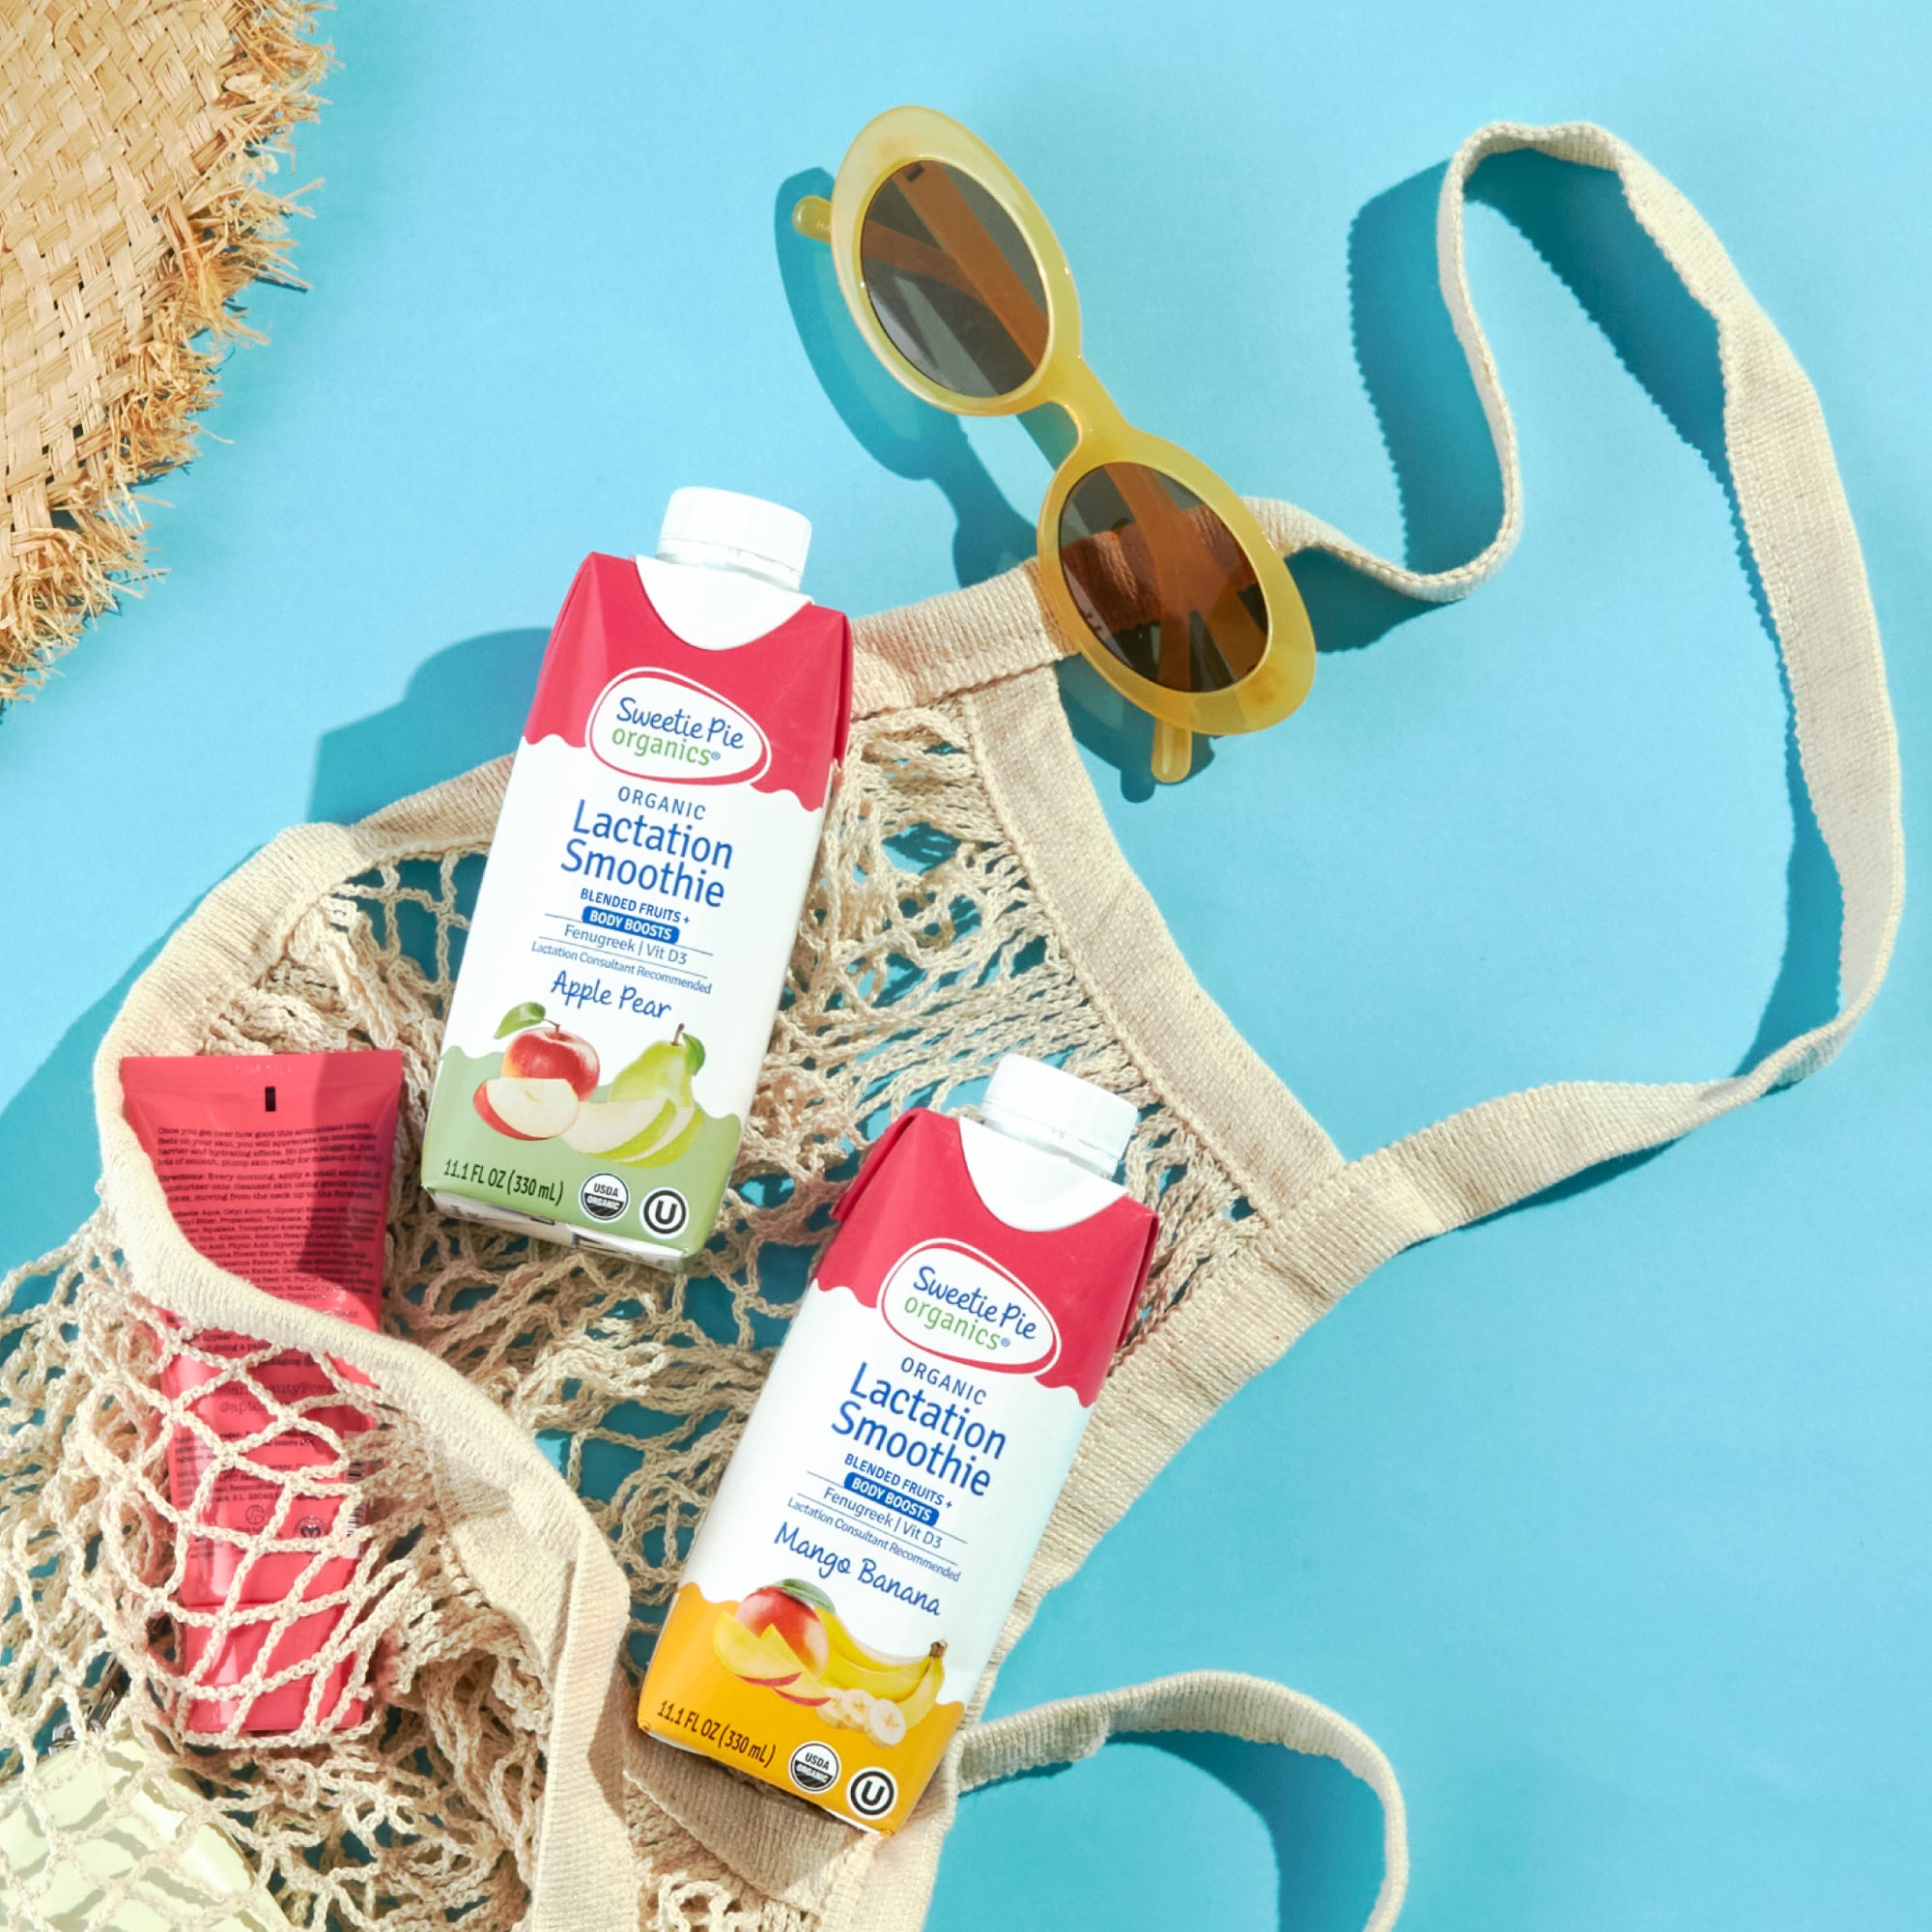 Flatlay image of Sweetie Pie Organics Mango Banana and Apple Bear Smoothie in a beach bag with sunglasses 